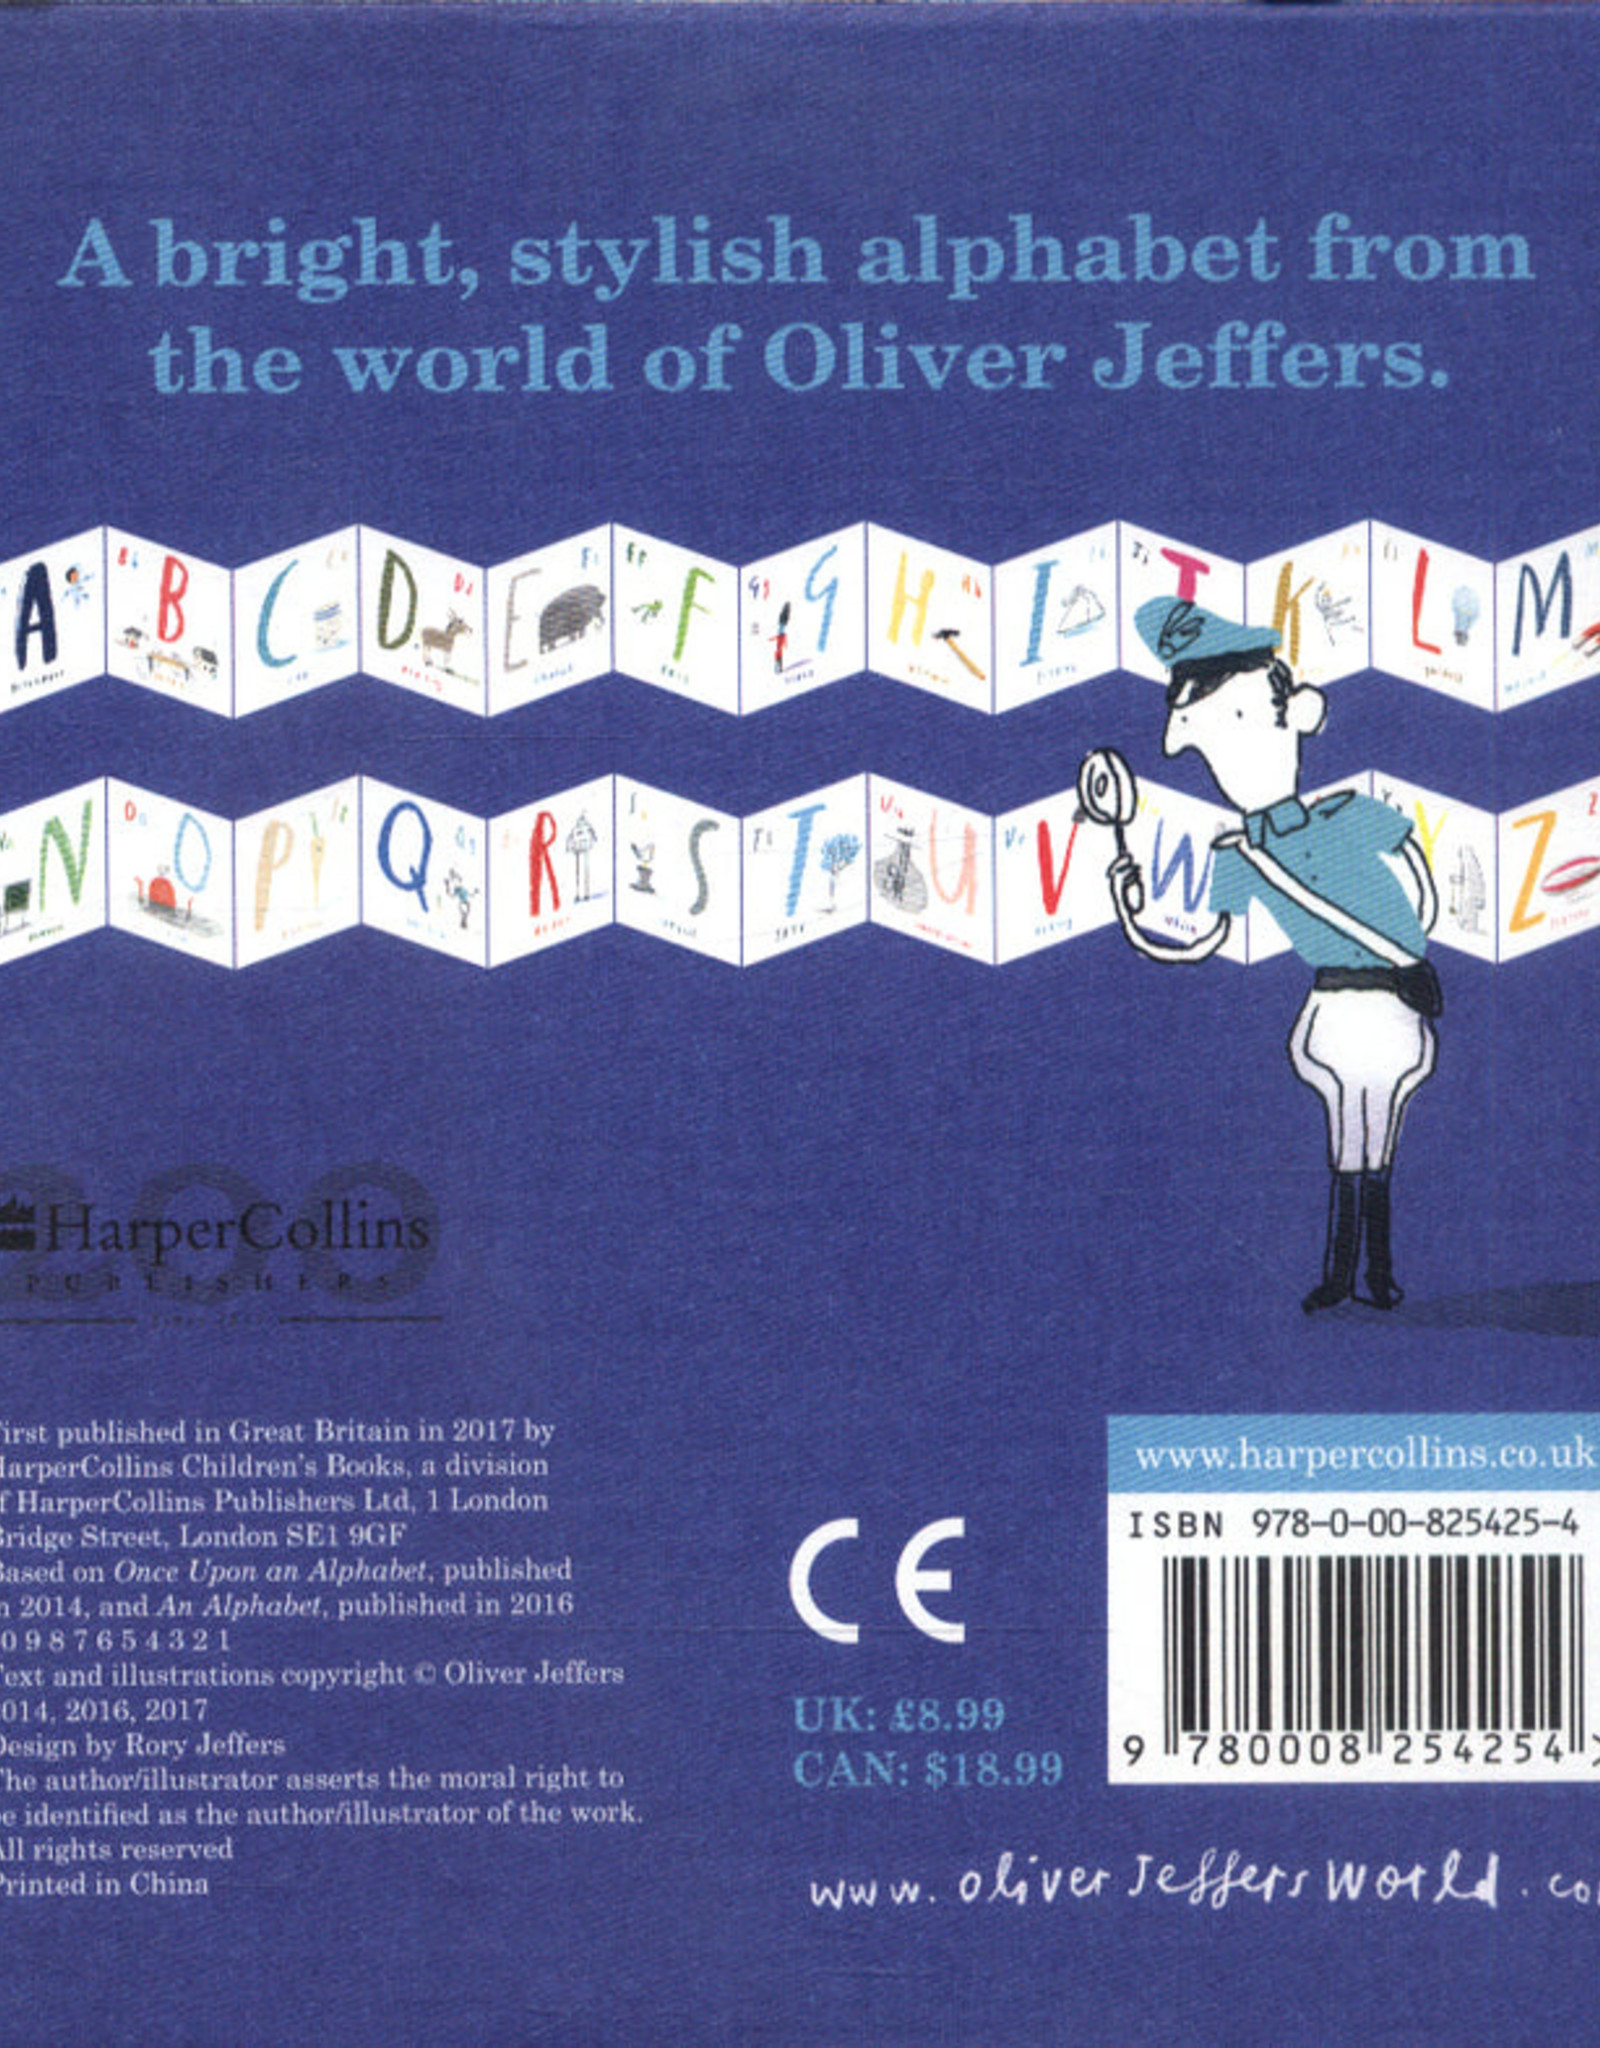 HarperCollins An Alphabet Fold Out A-Z Oliver Jeffers (Board Book)